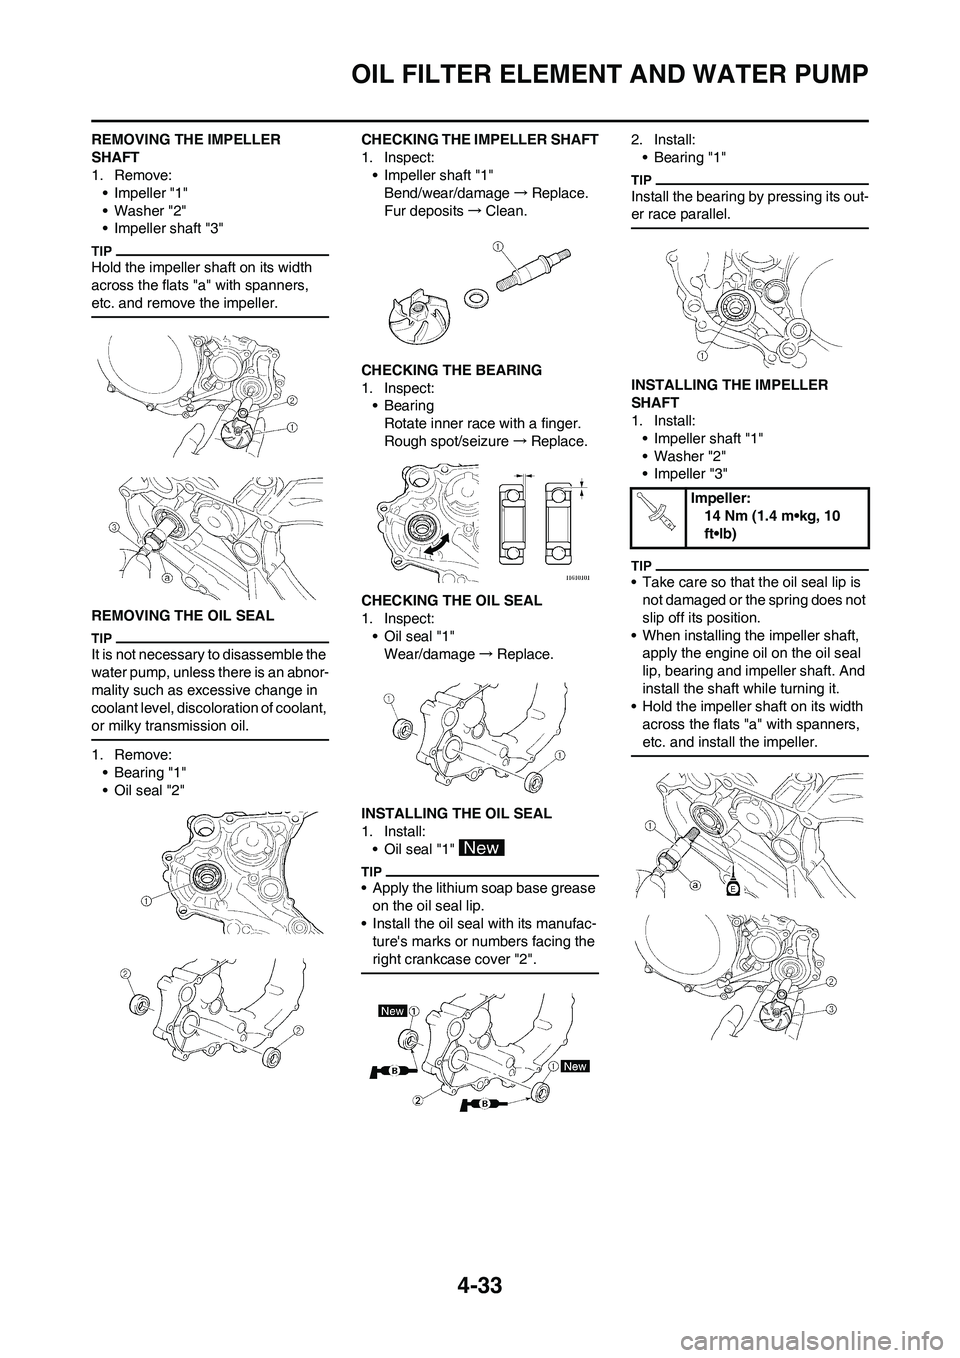 YAMAHA YZ450F 2011  Owners Manual 4-33
OIL FILTER ELEMENT AND WATER PUMP
REMOVING THE IMPELLER 
SHAFT
1. Remove:
• Impeller "1"
• Washer "2"
• Impeller shaft "3"
Hold the impeller shaft on its width 
across the flats "a" with sp